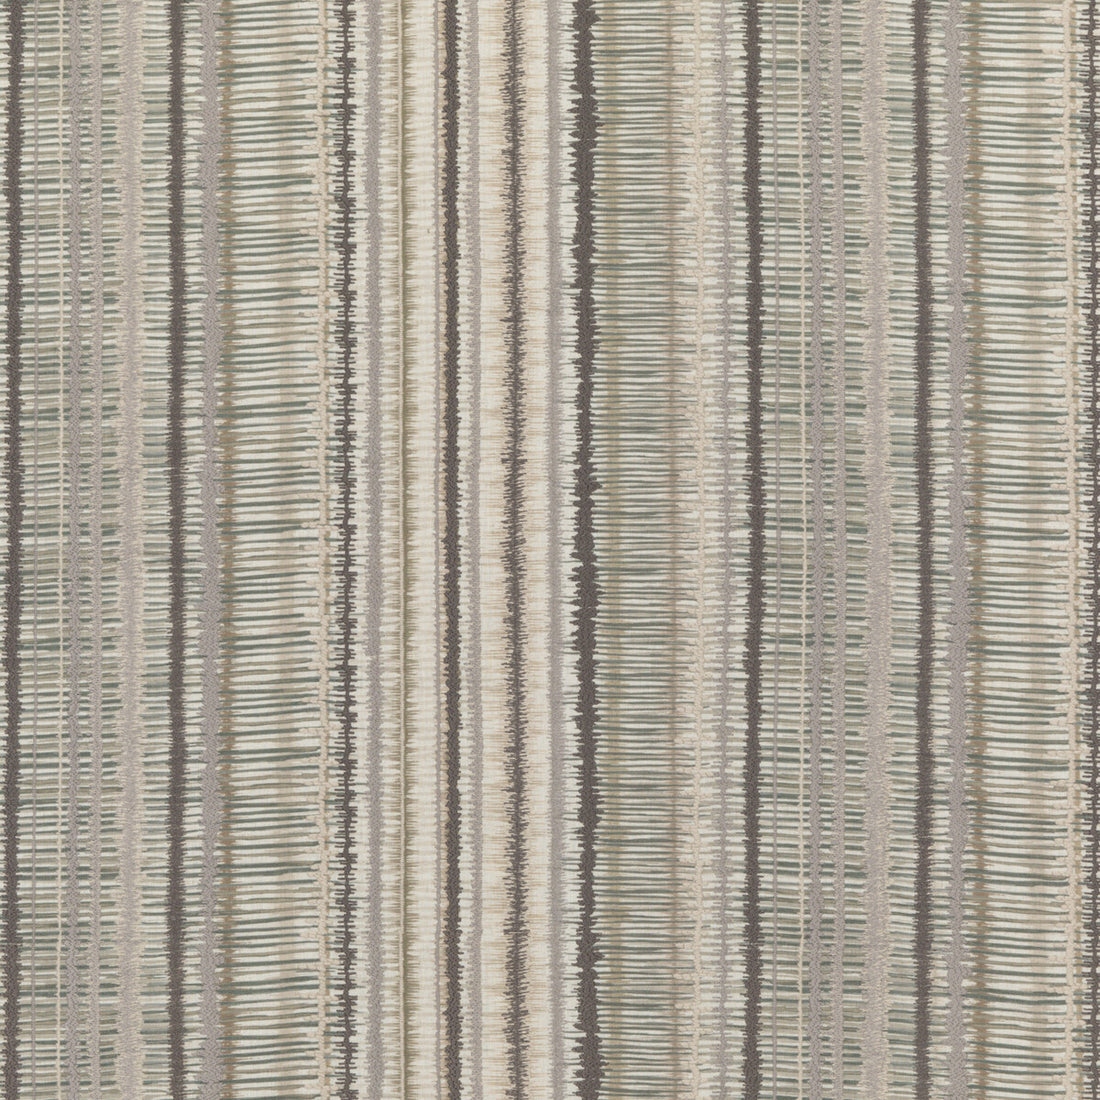 Toledo fabric in stone color - pattern PP50444.2.0 - by Baker Lifestyle in the Homes &amp; Gardens III collection